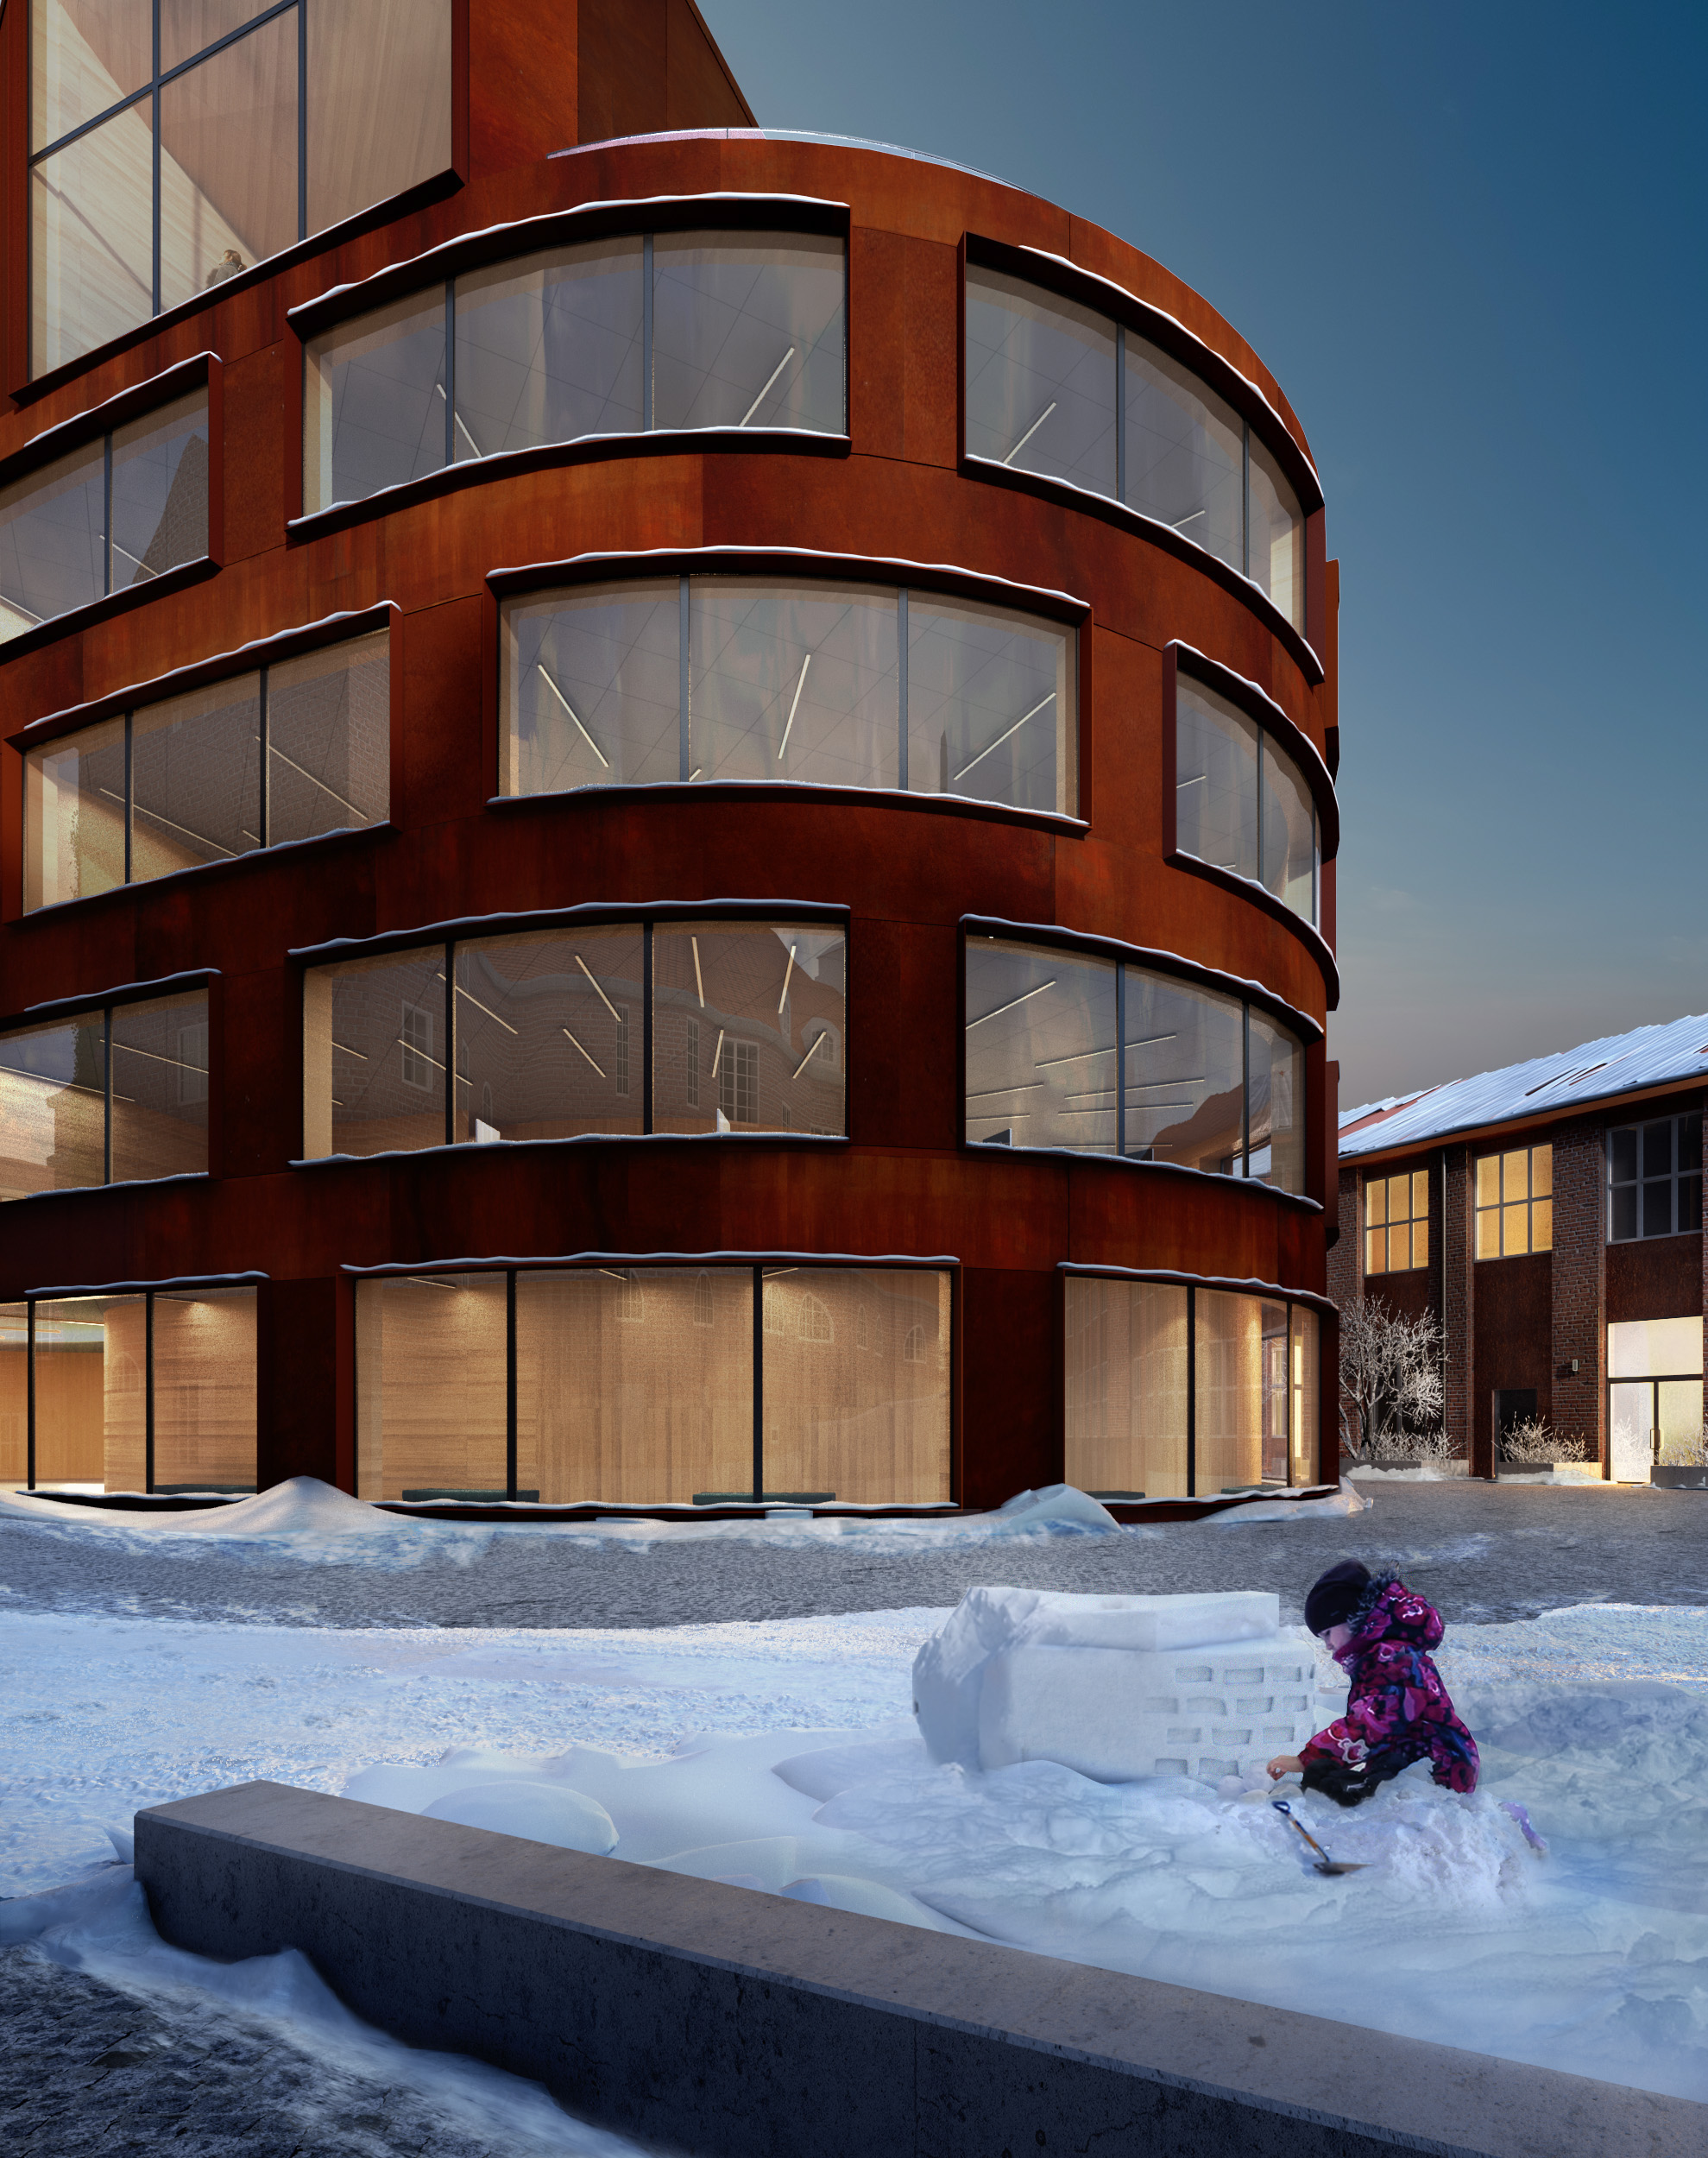 Winter Museum render by YMAGES. Architect visualization and design.